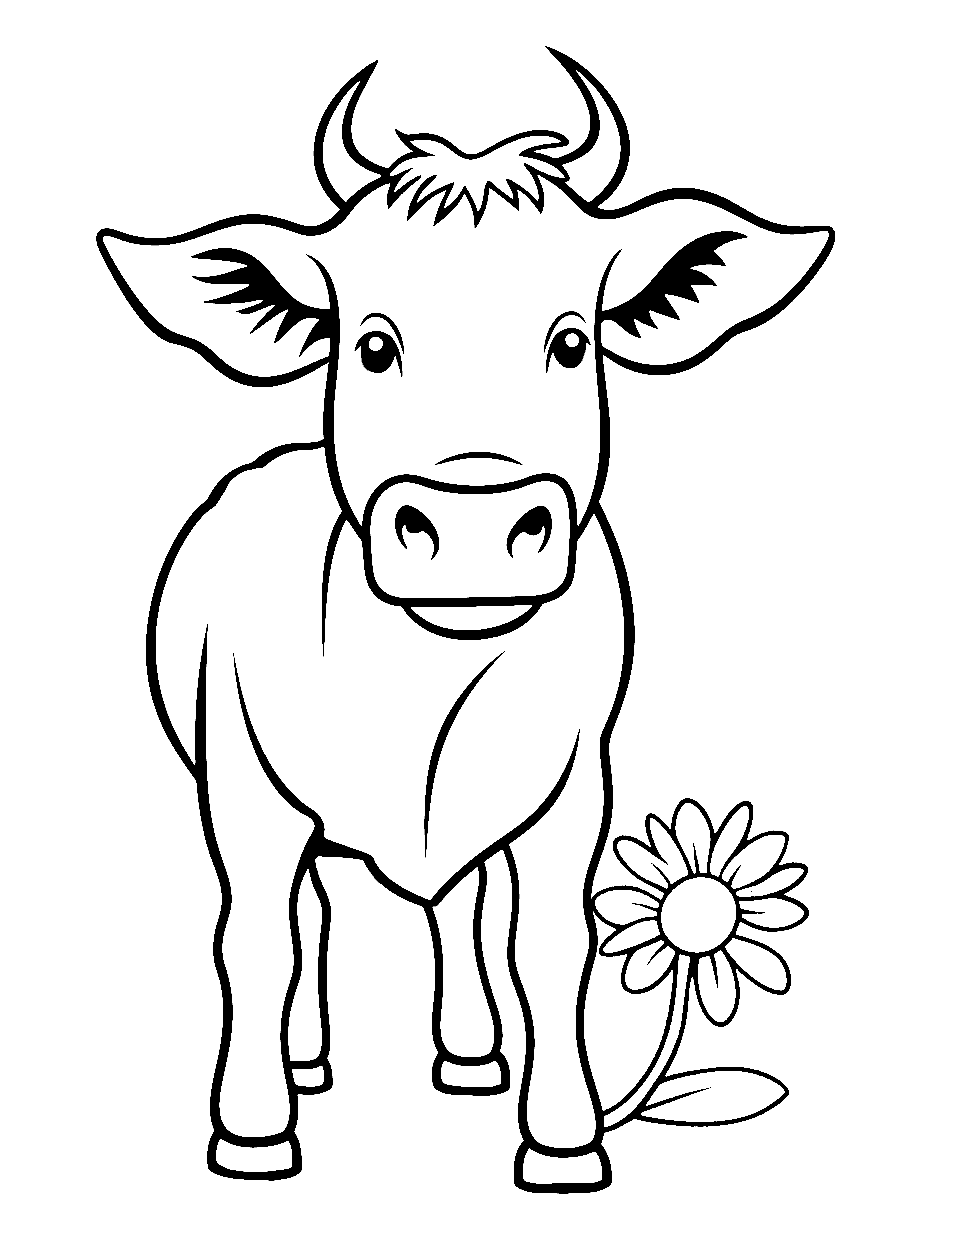 Springtime Flower and Cow Coloring Page - A cow with a single, large spring flower.